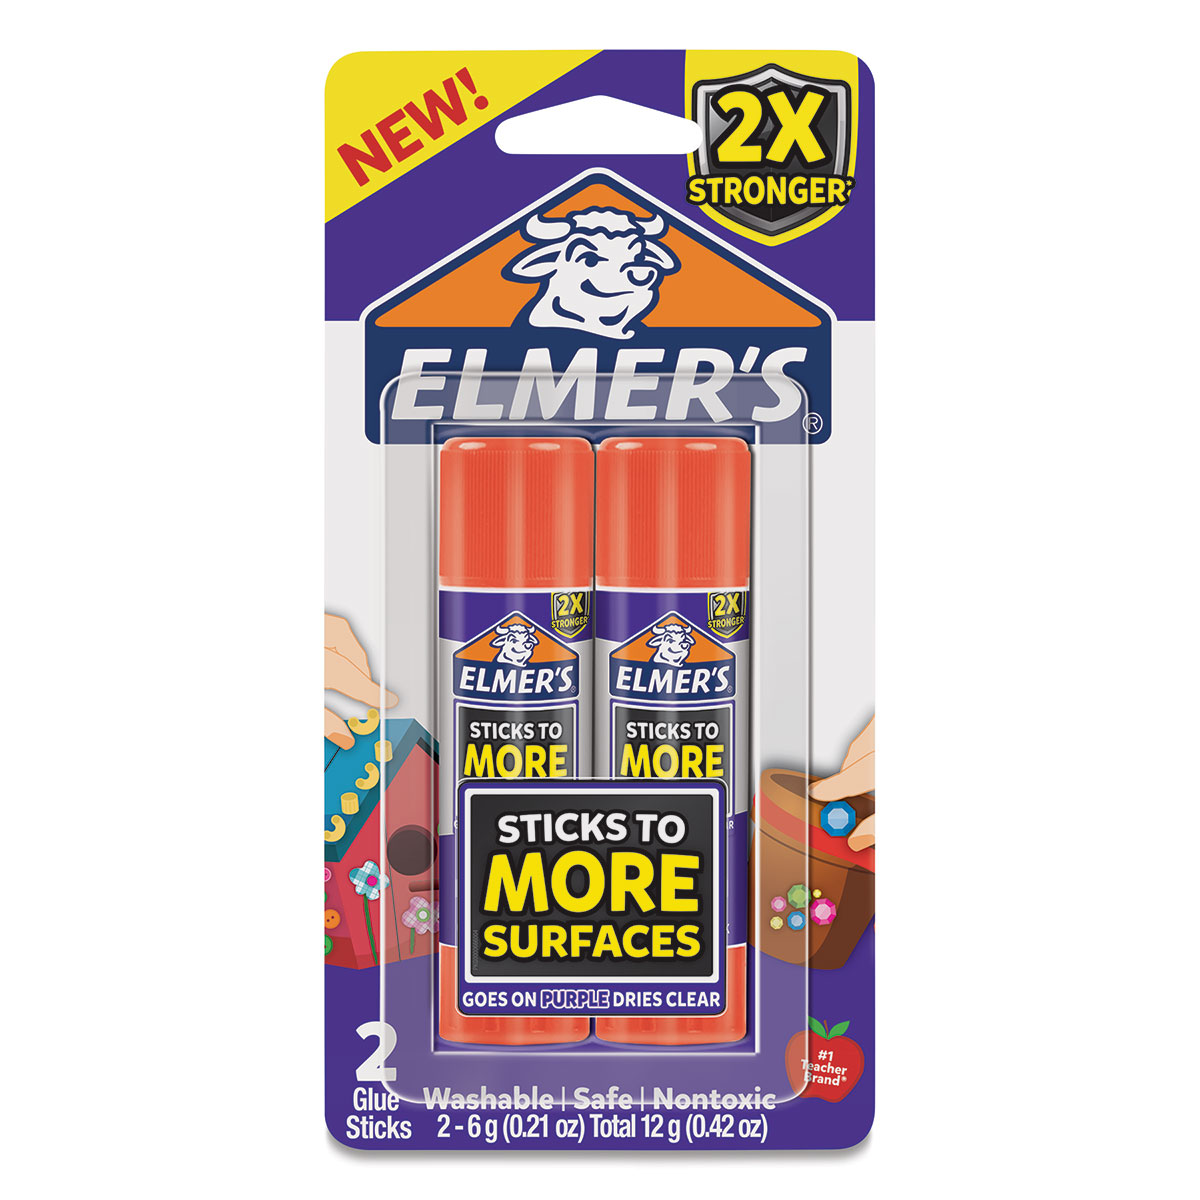 Has anyone used the Elmer's sticks to more surface purple glue stick? I  found that it is a completely different medium than the regular purple  washable stick as shown on the left.